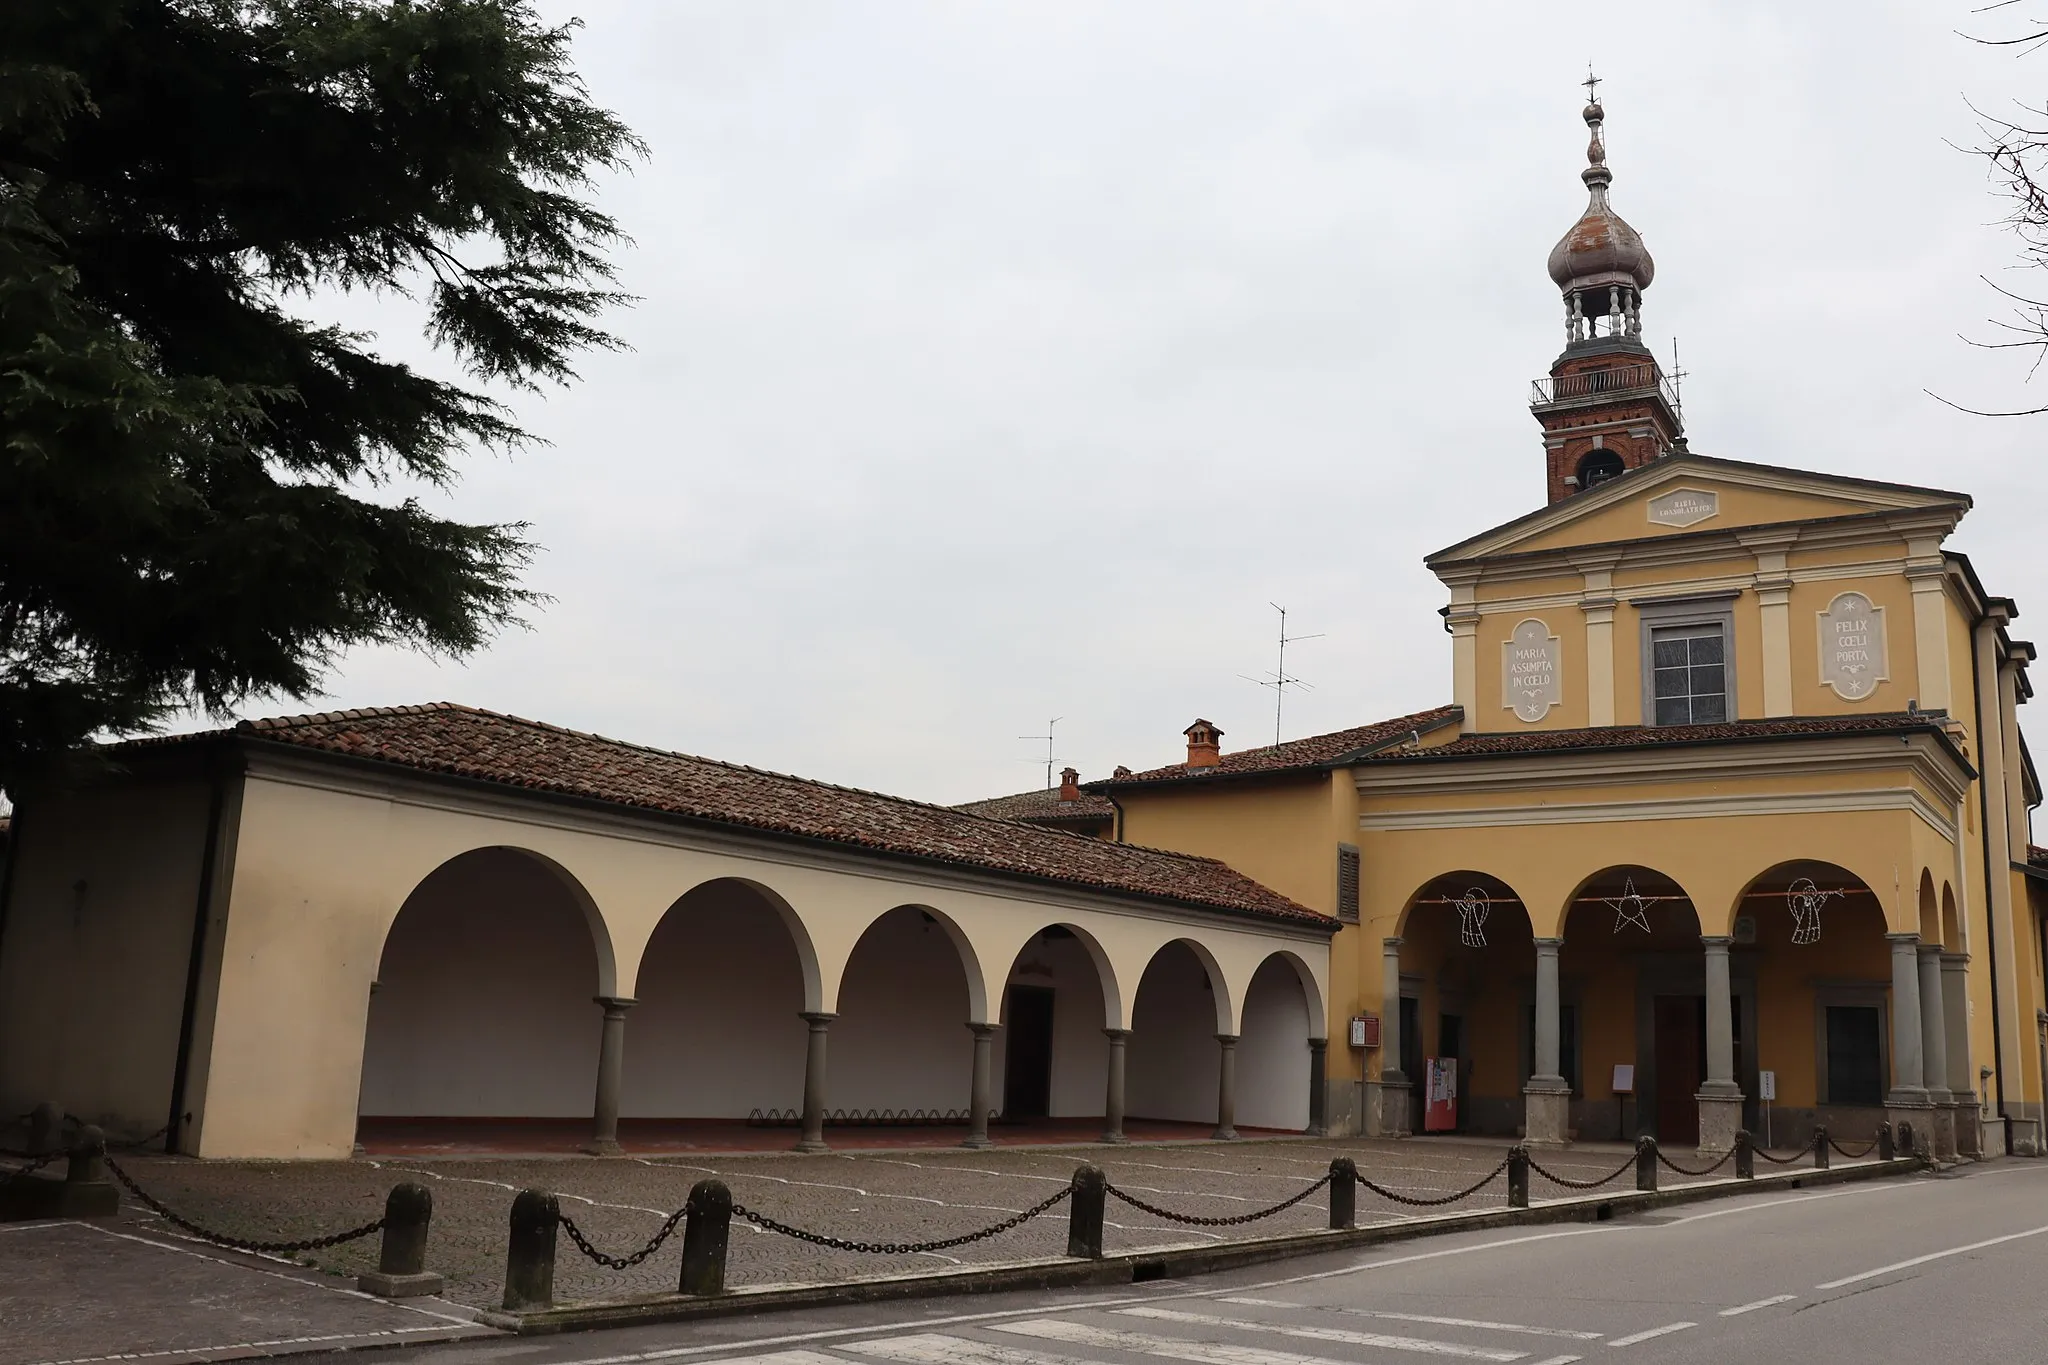 Photo showing: This is a sanctuary dedicated to the Virgin Mary and located in Ghisalba, in the province of Bergamo.